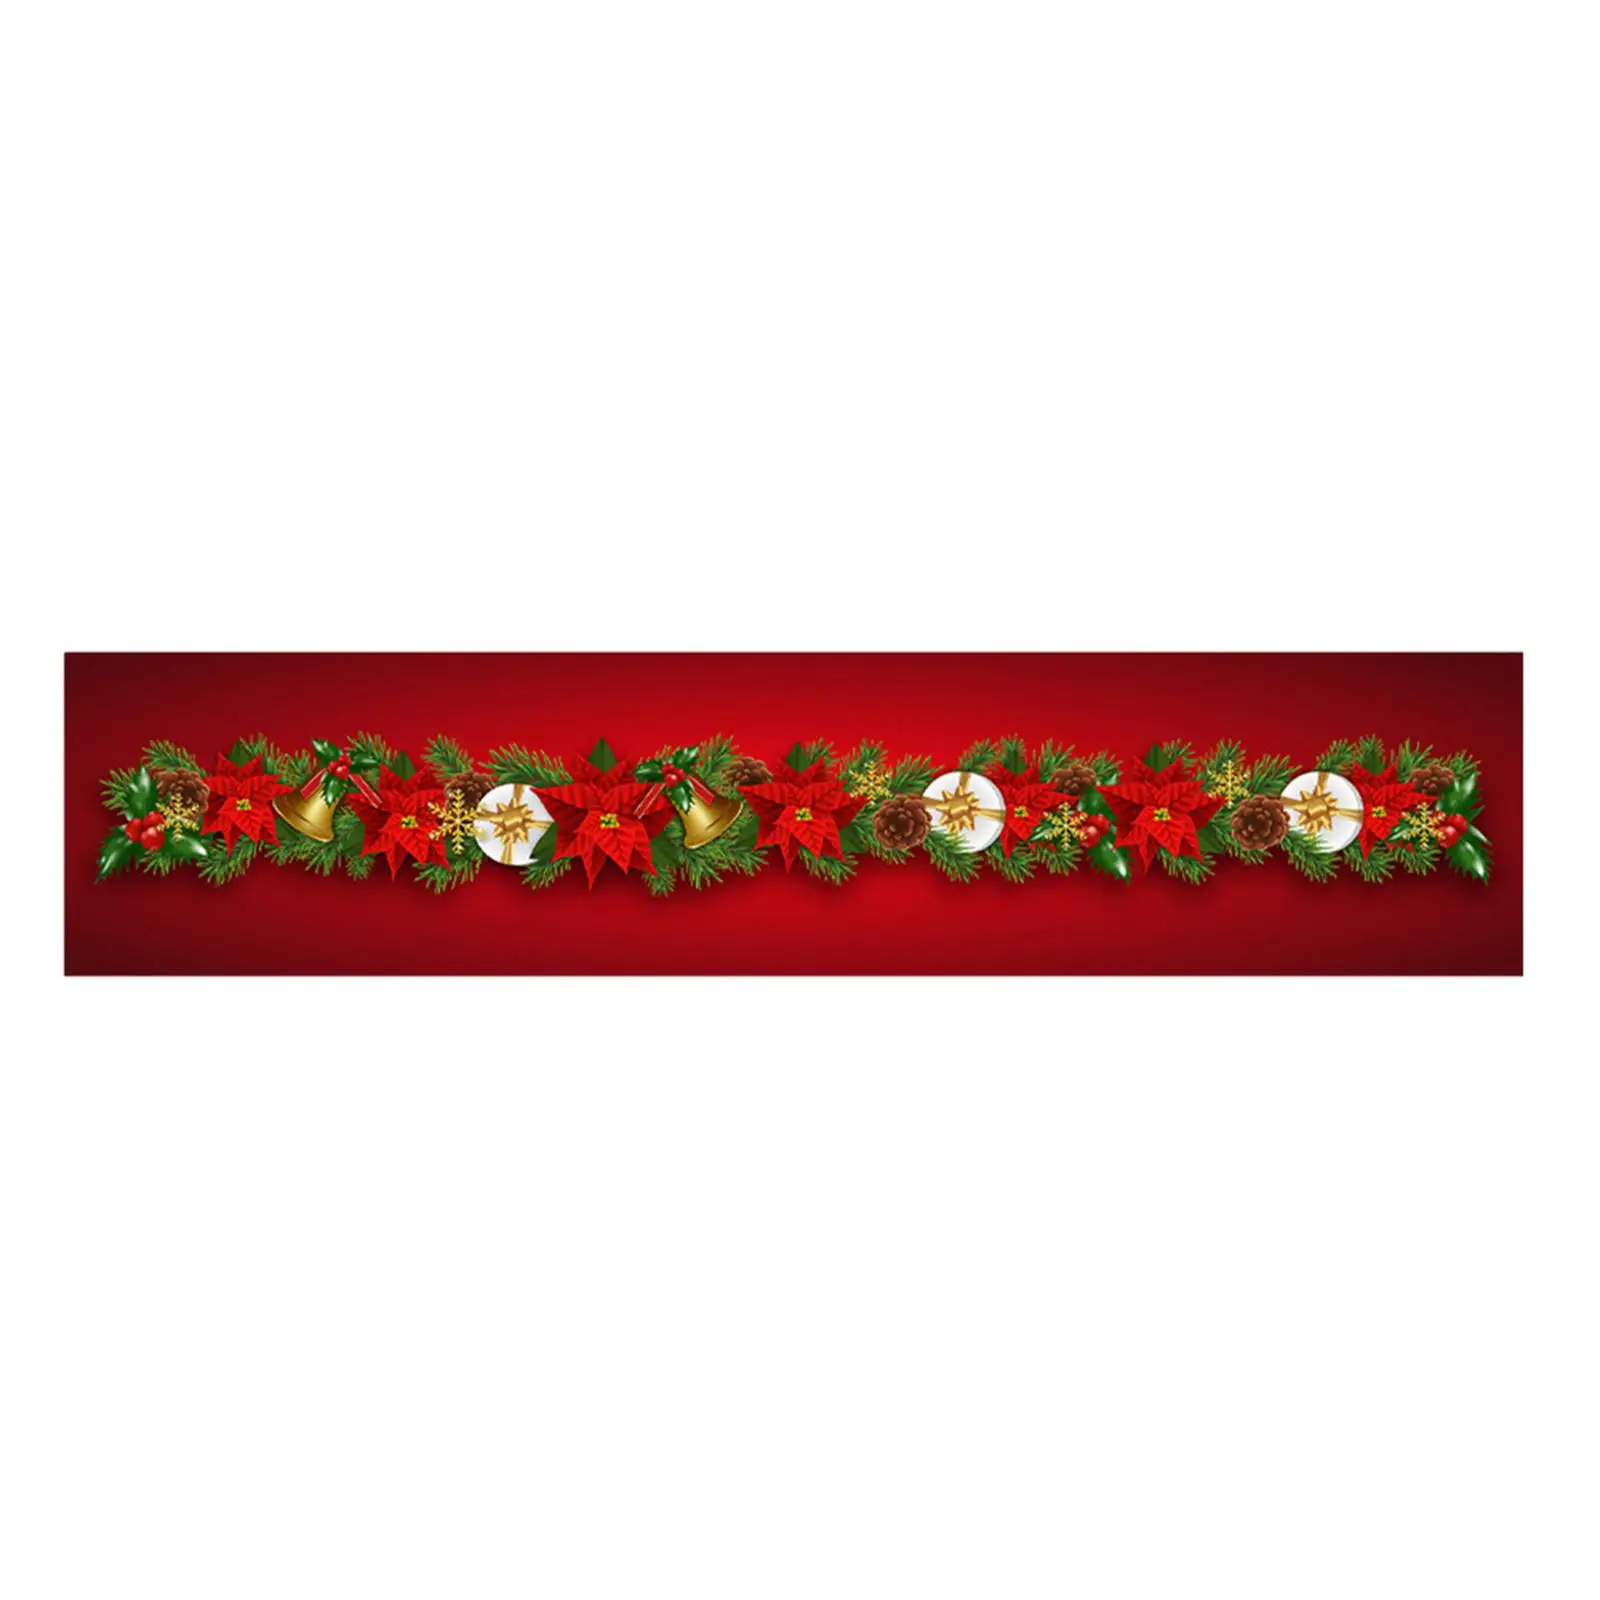 Christmas Table Runner 13 x 71 inch Red Table Cloth for Winter Kitchen Home